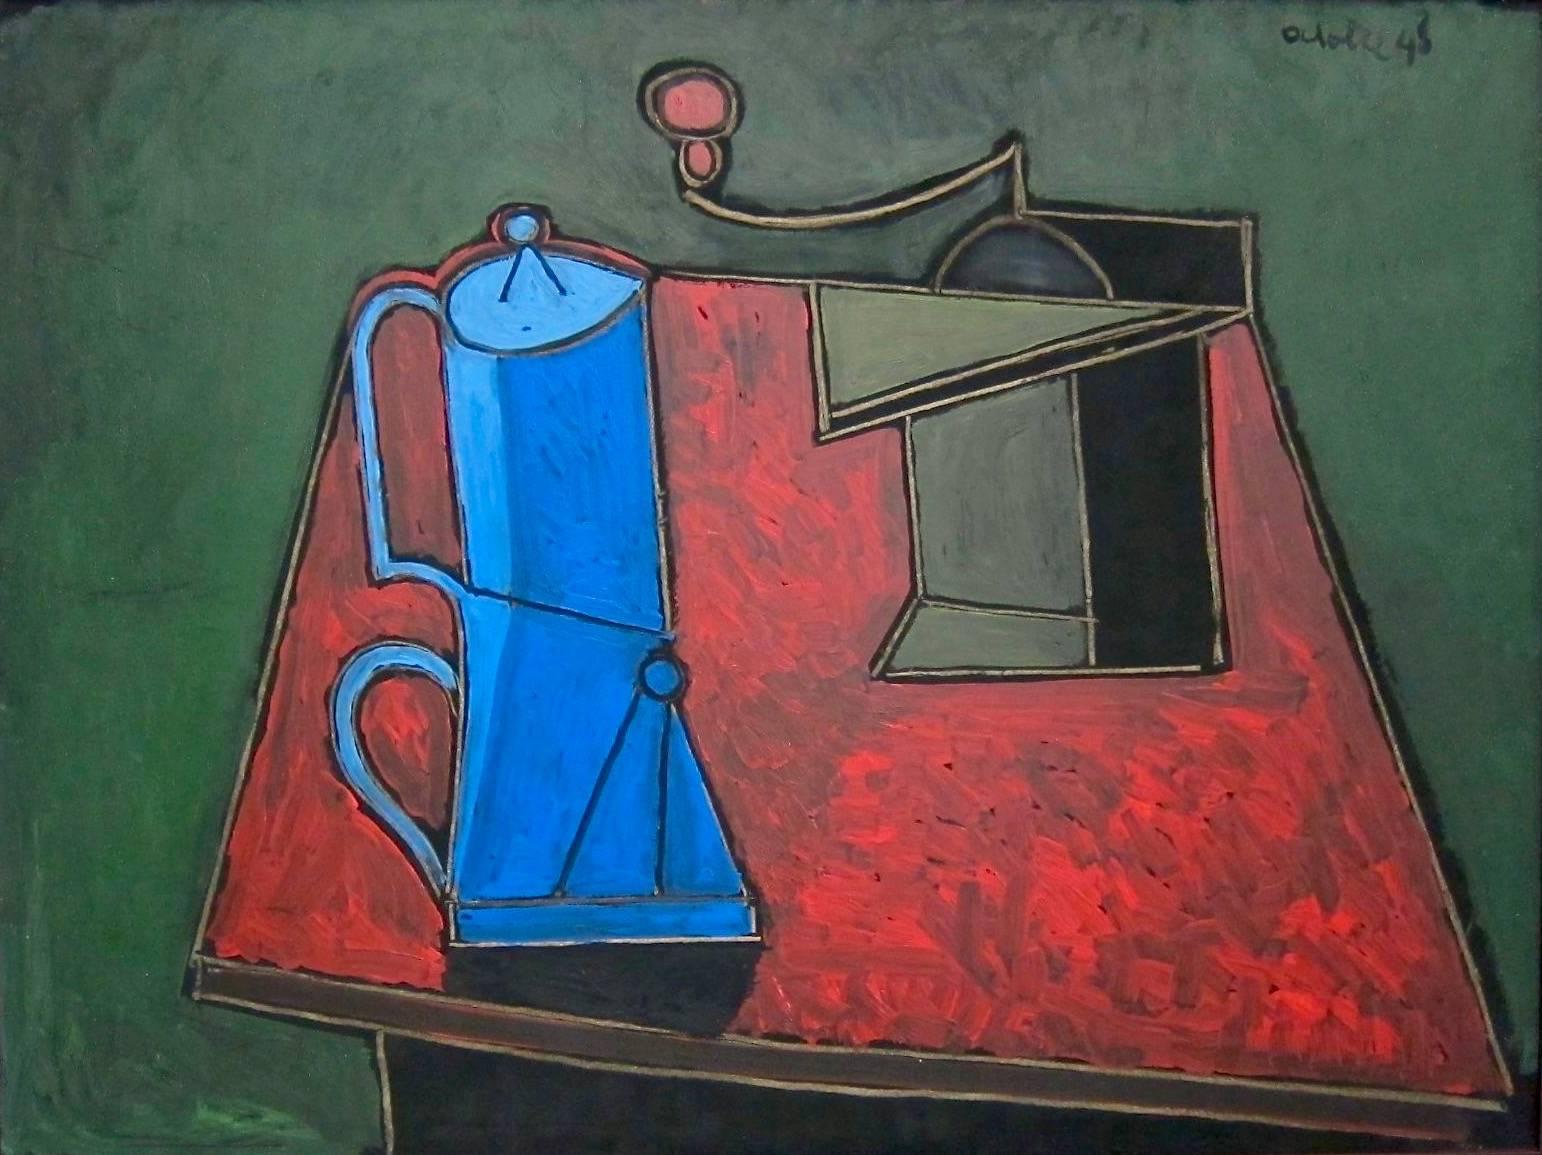 Bold cubist style still life oil painting by Spanish/French artist Javier Vilato.
Javier Vilato was an accomplished artist and the nephew of Pablo Picasso.
This painting was created while Javier lived and painted with his uncle, Pablo Picasso in